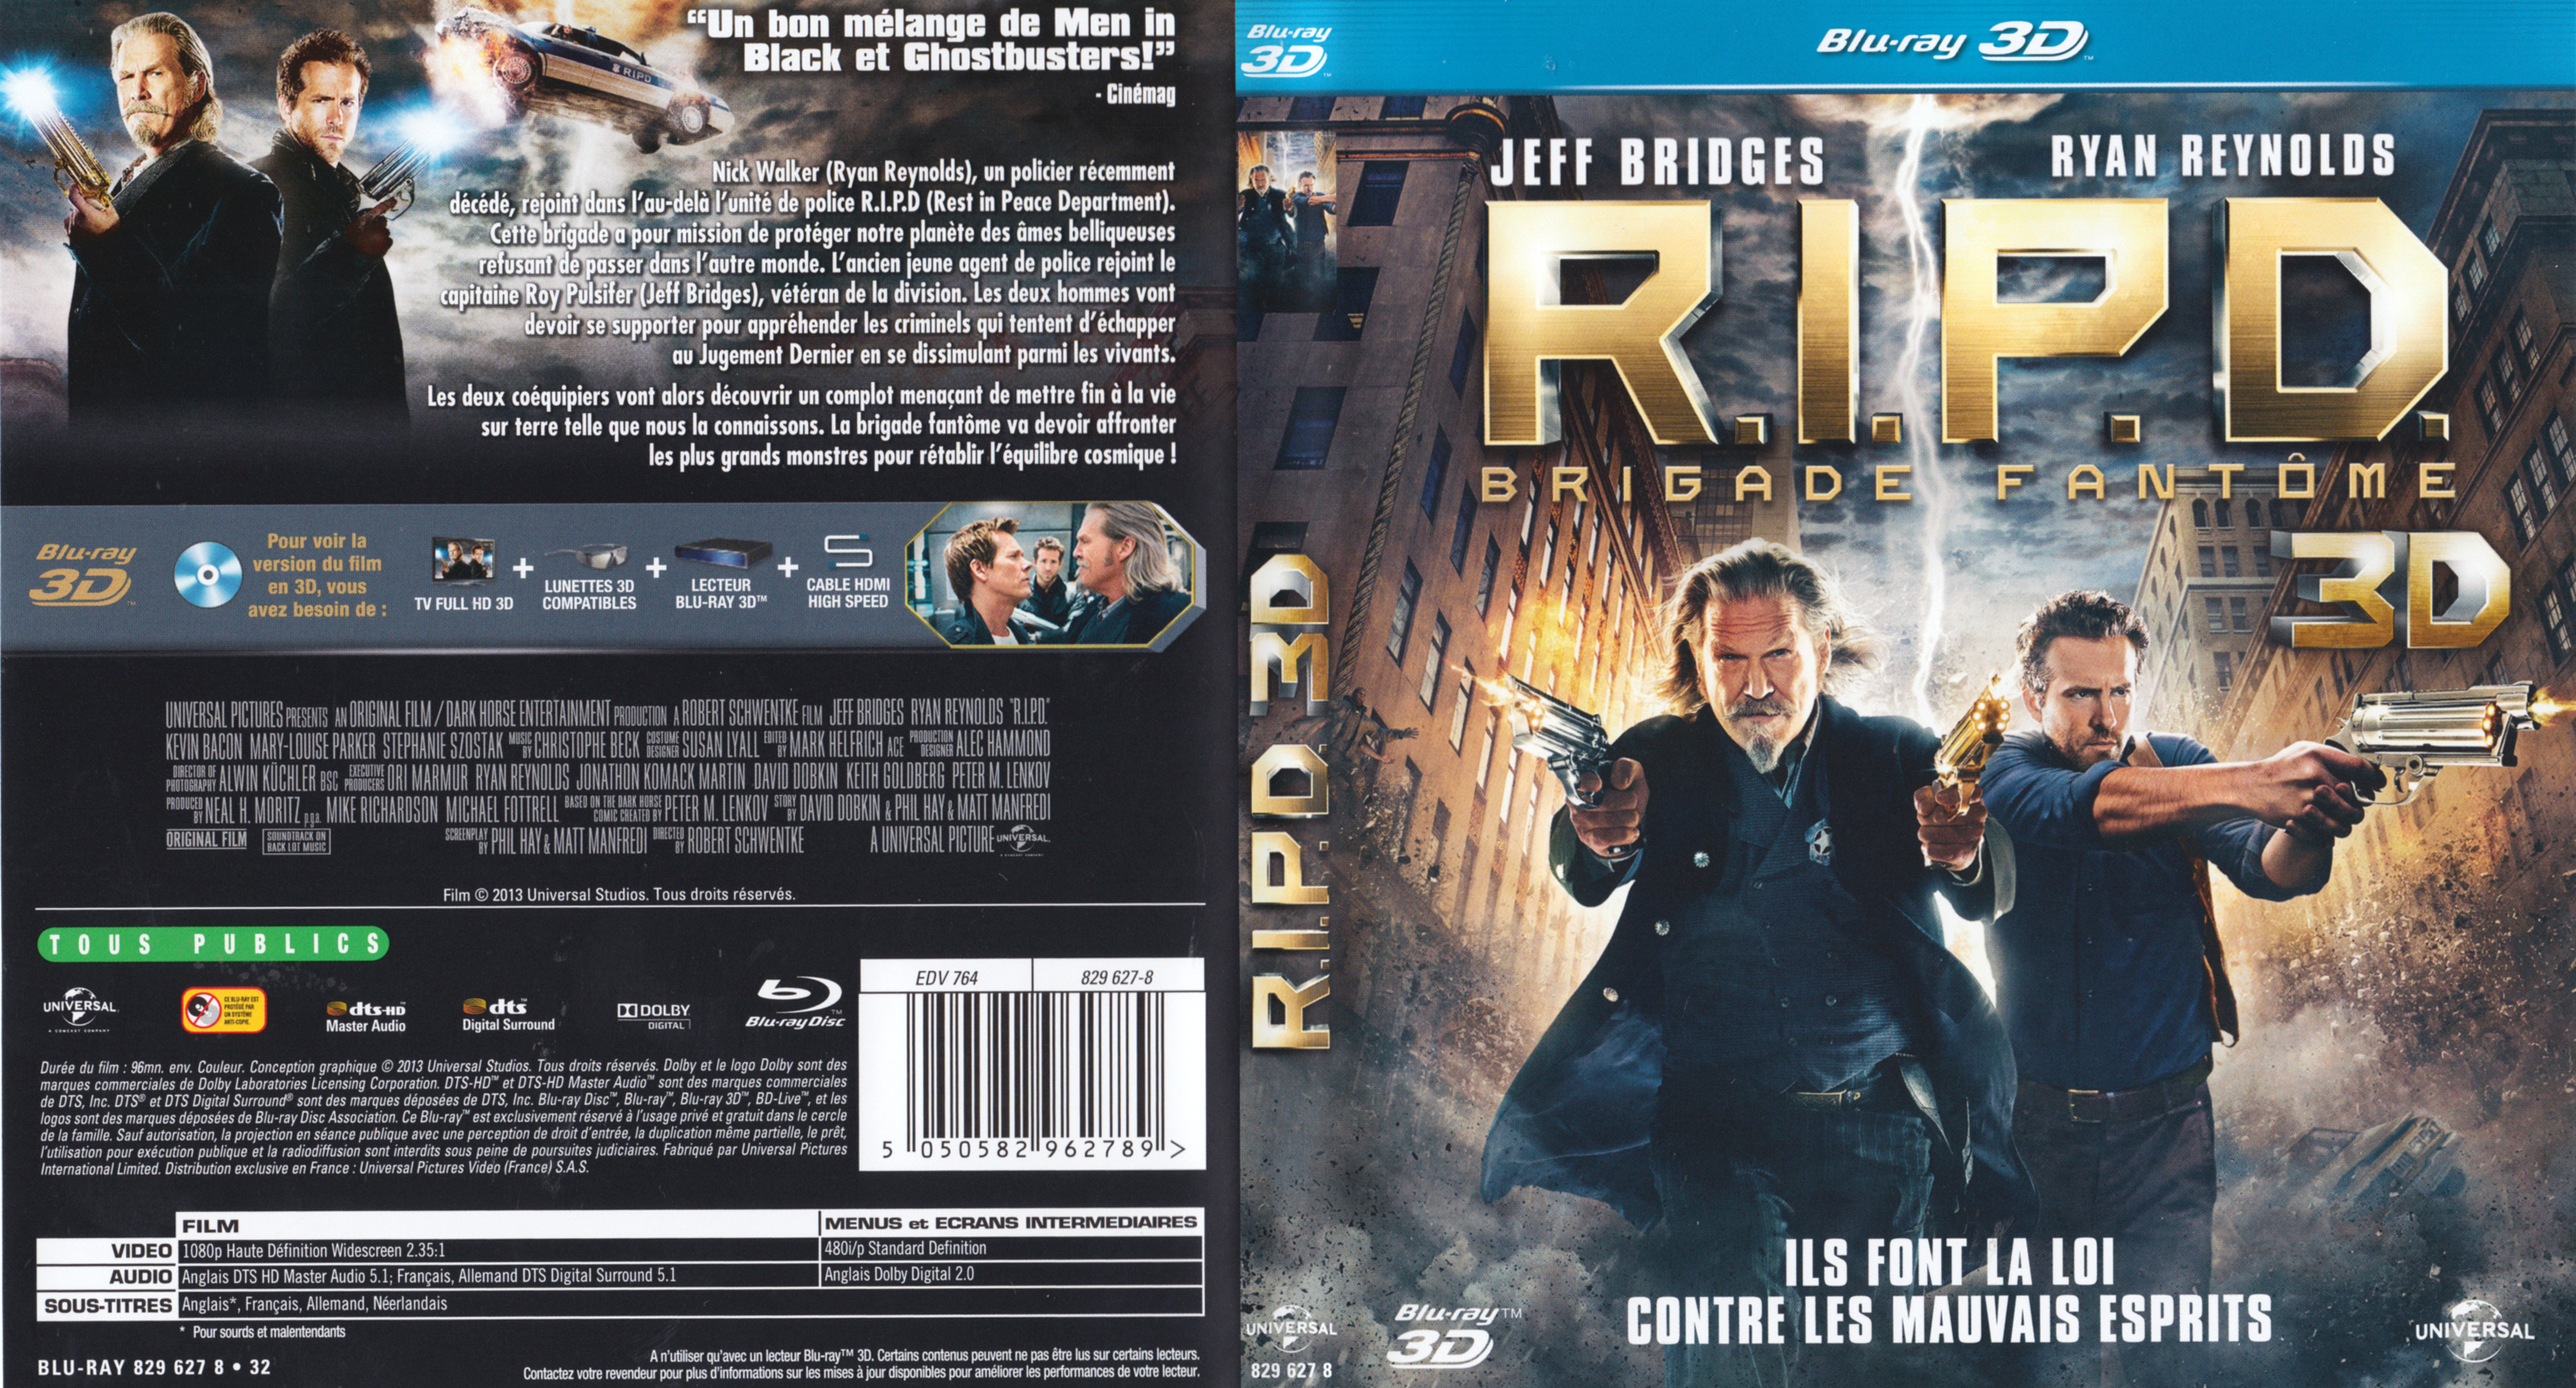 Jaquette DVD R.I.P.D. 3D (BLU-RAY)